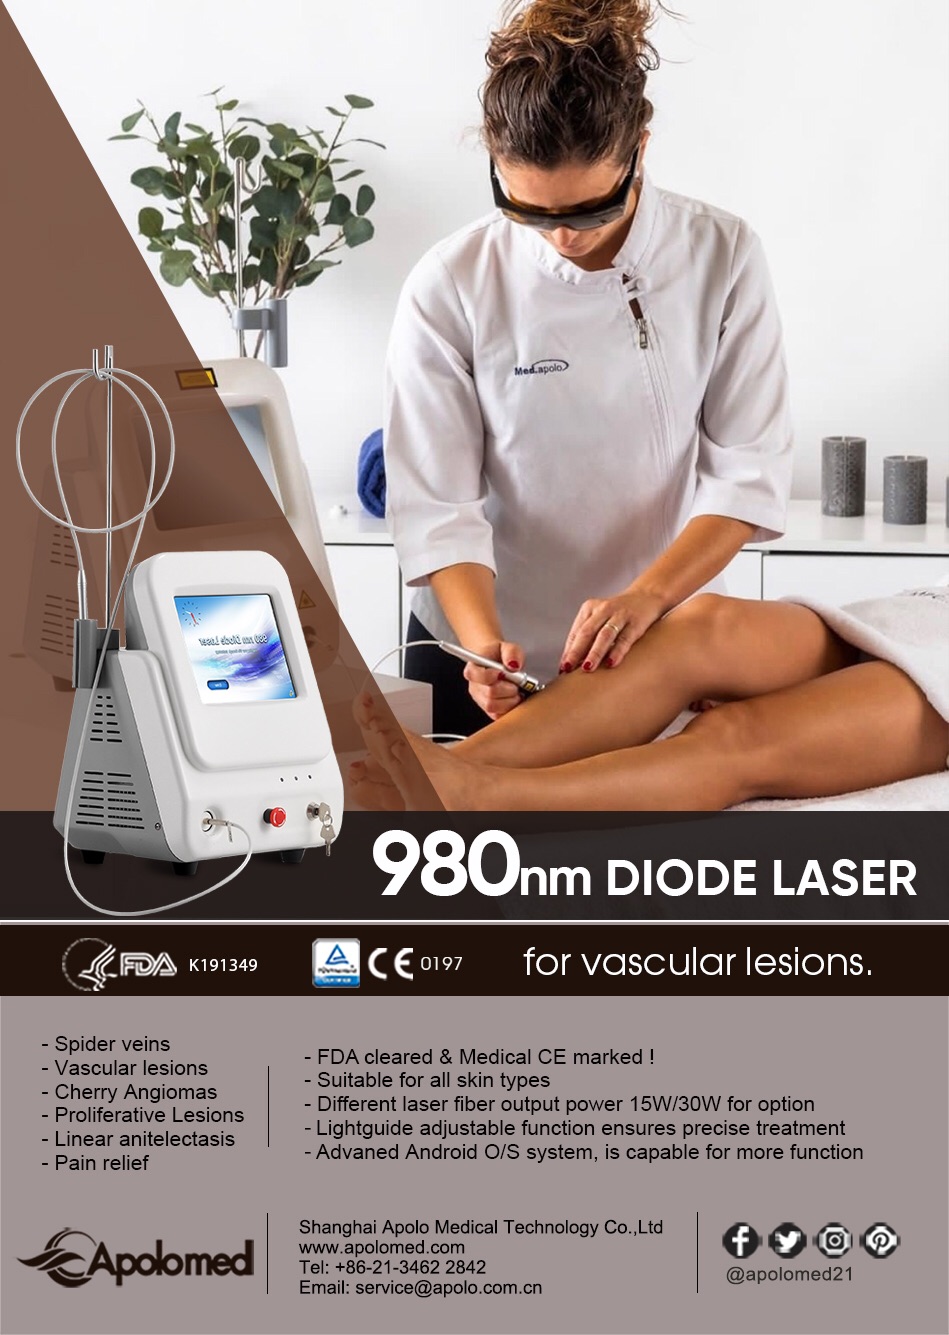 Why do you need a 980nm Diode Laser?